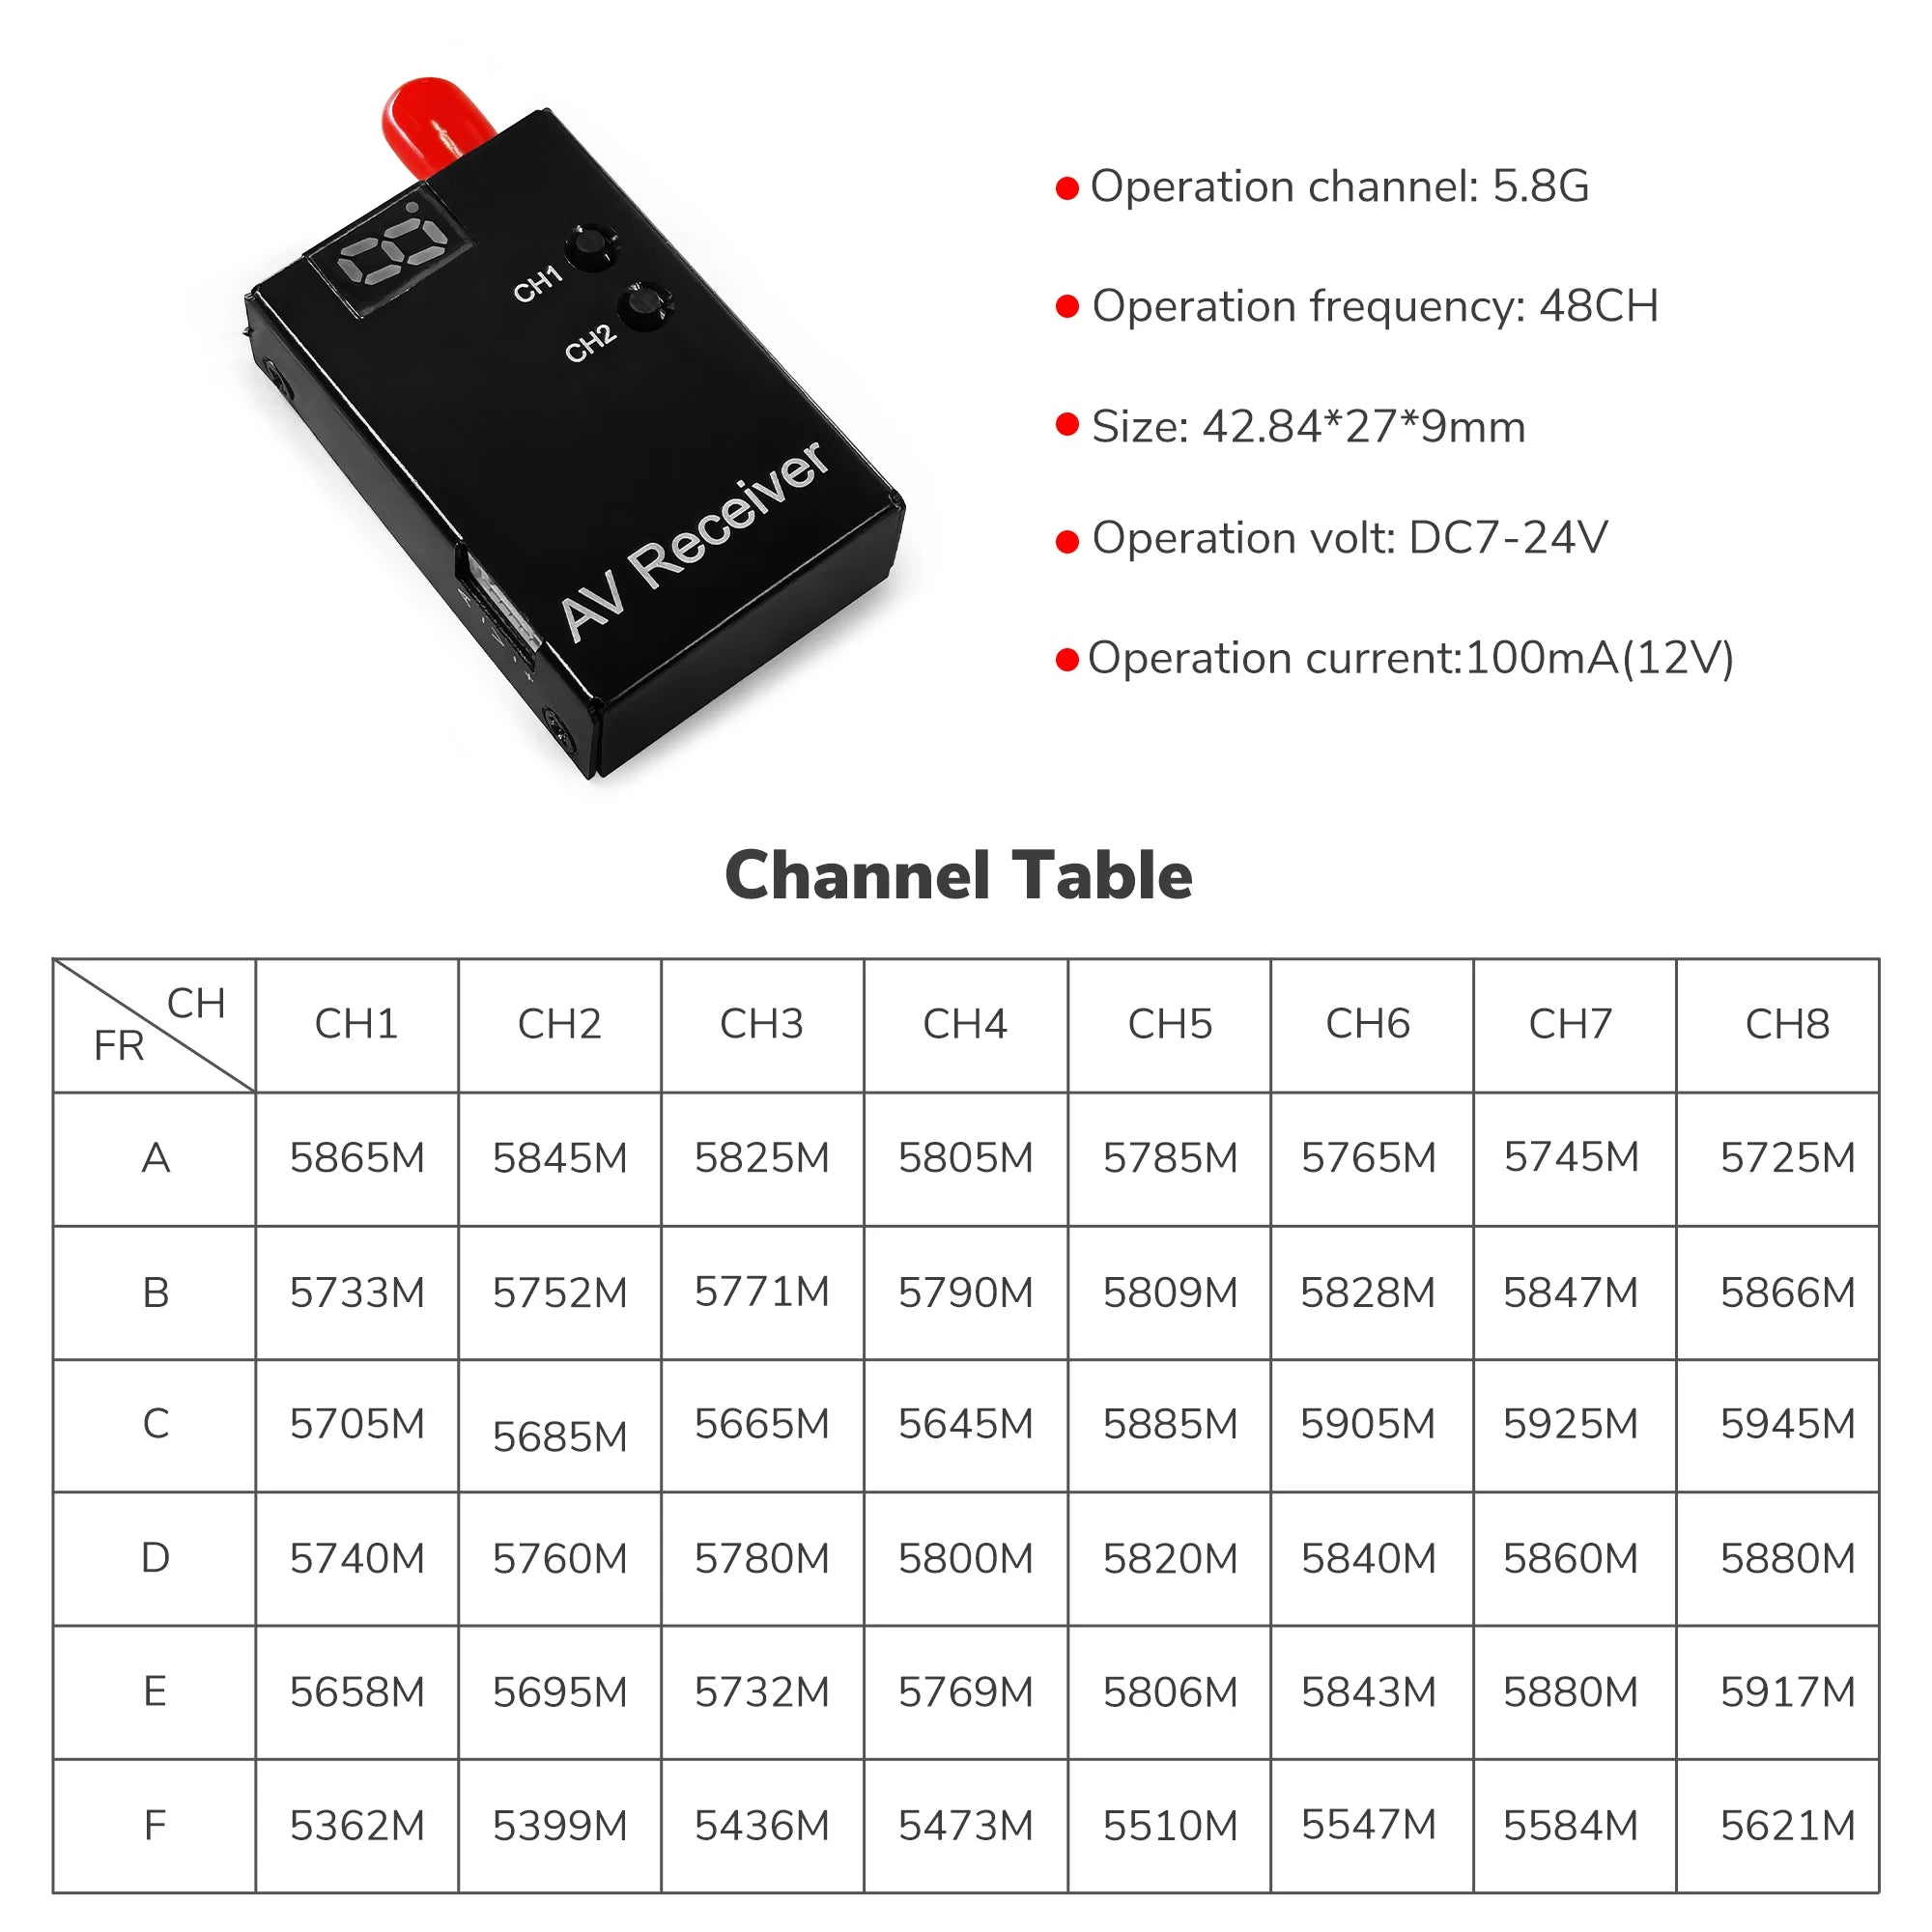 Radiolink EWRF 708R Receiver, default transmission power is 25mw to oversea .